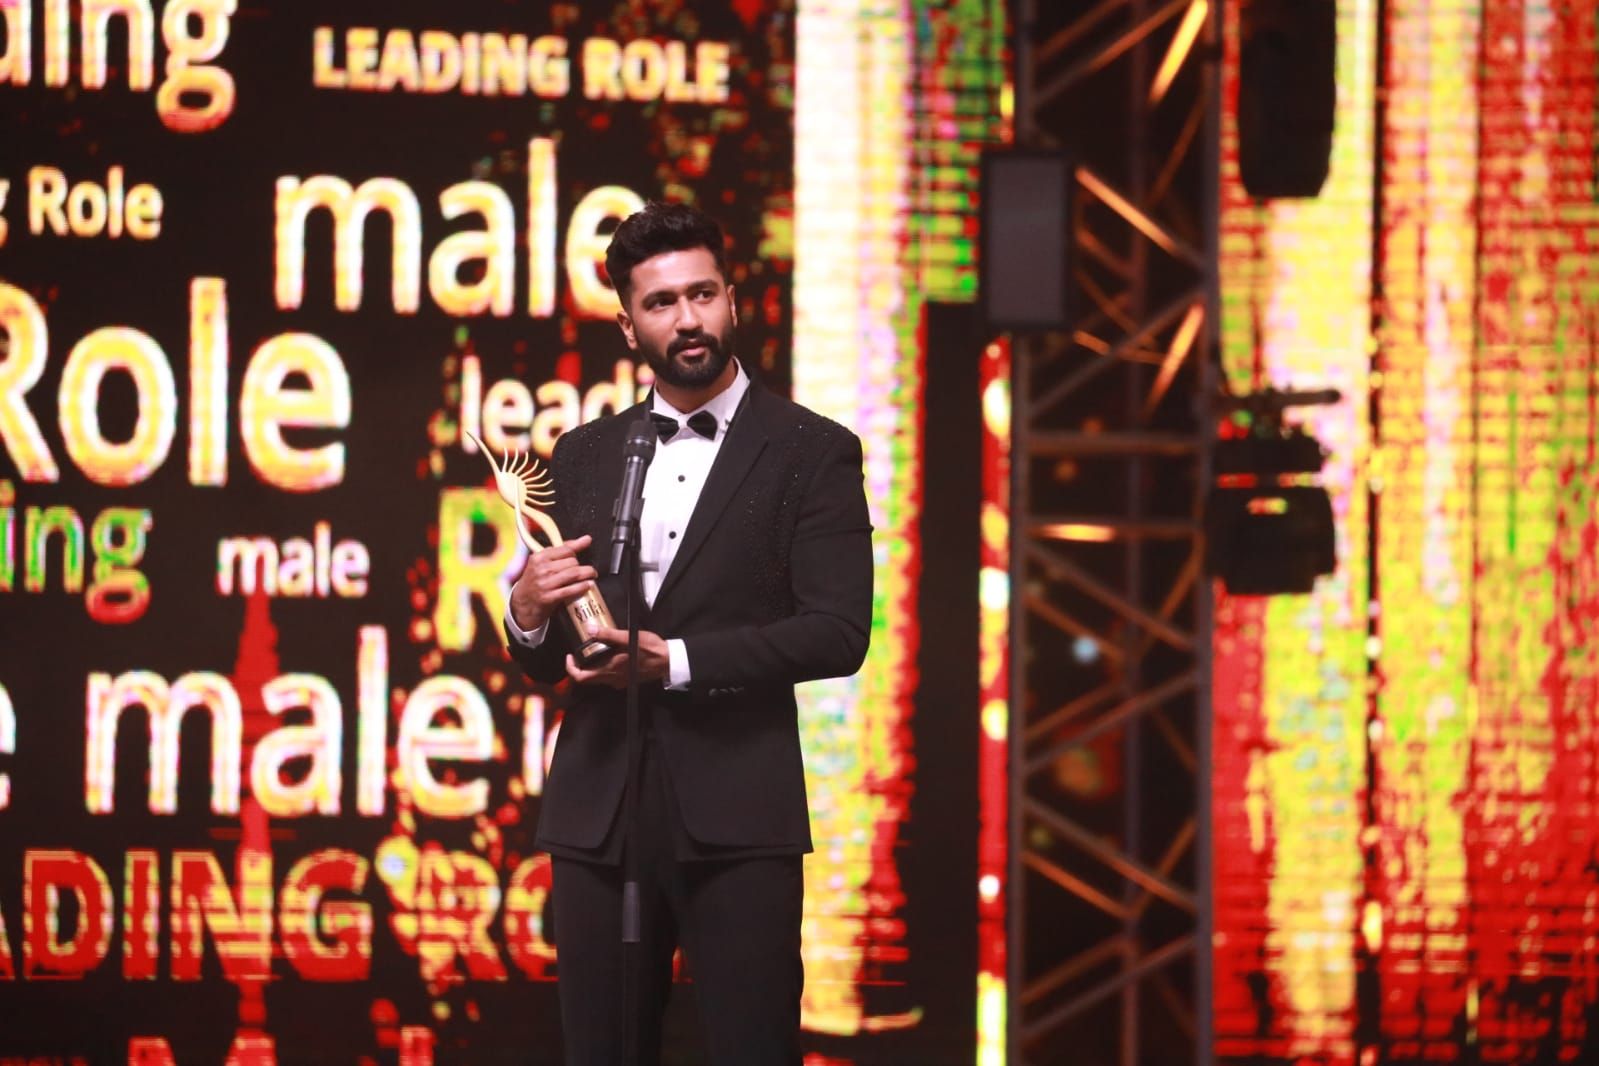 At IIFA 2022, Irrfan Khan given a special tribute by Best Actor winner Vicky Kaushal